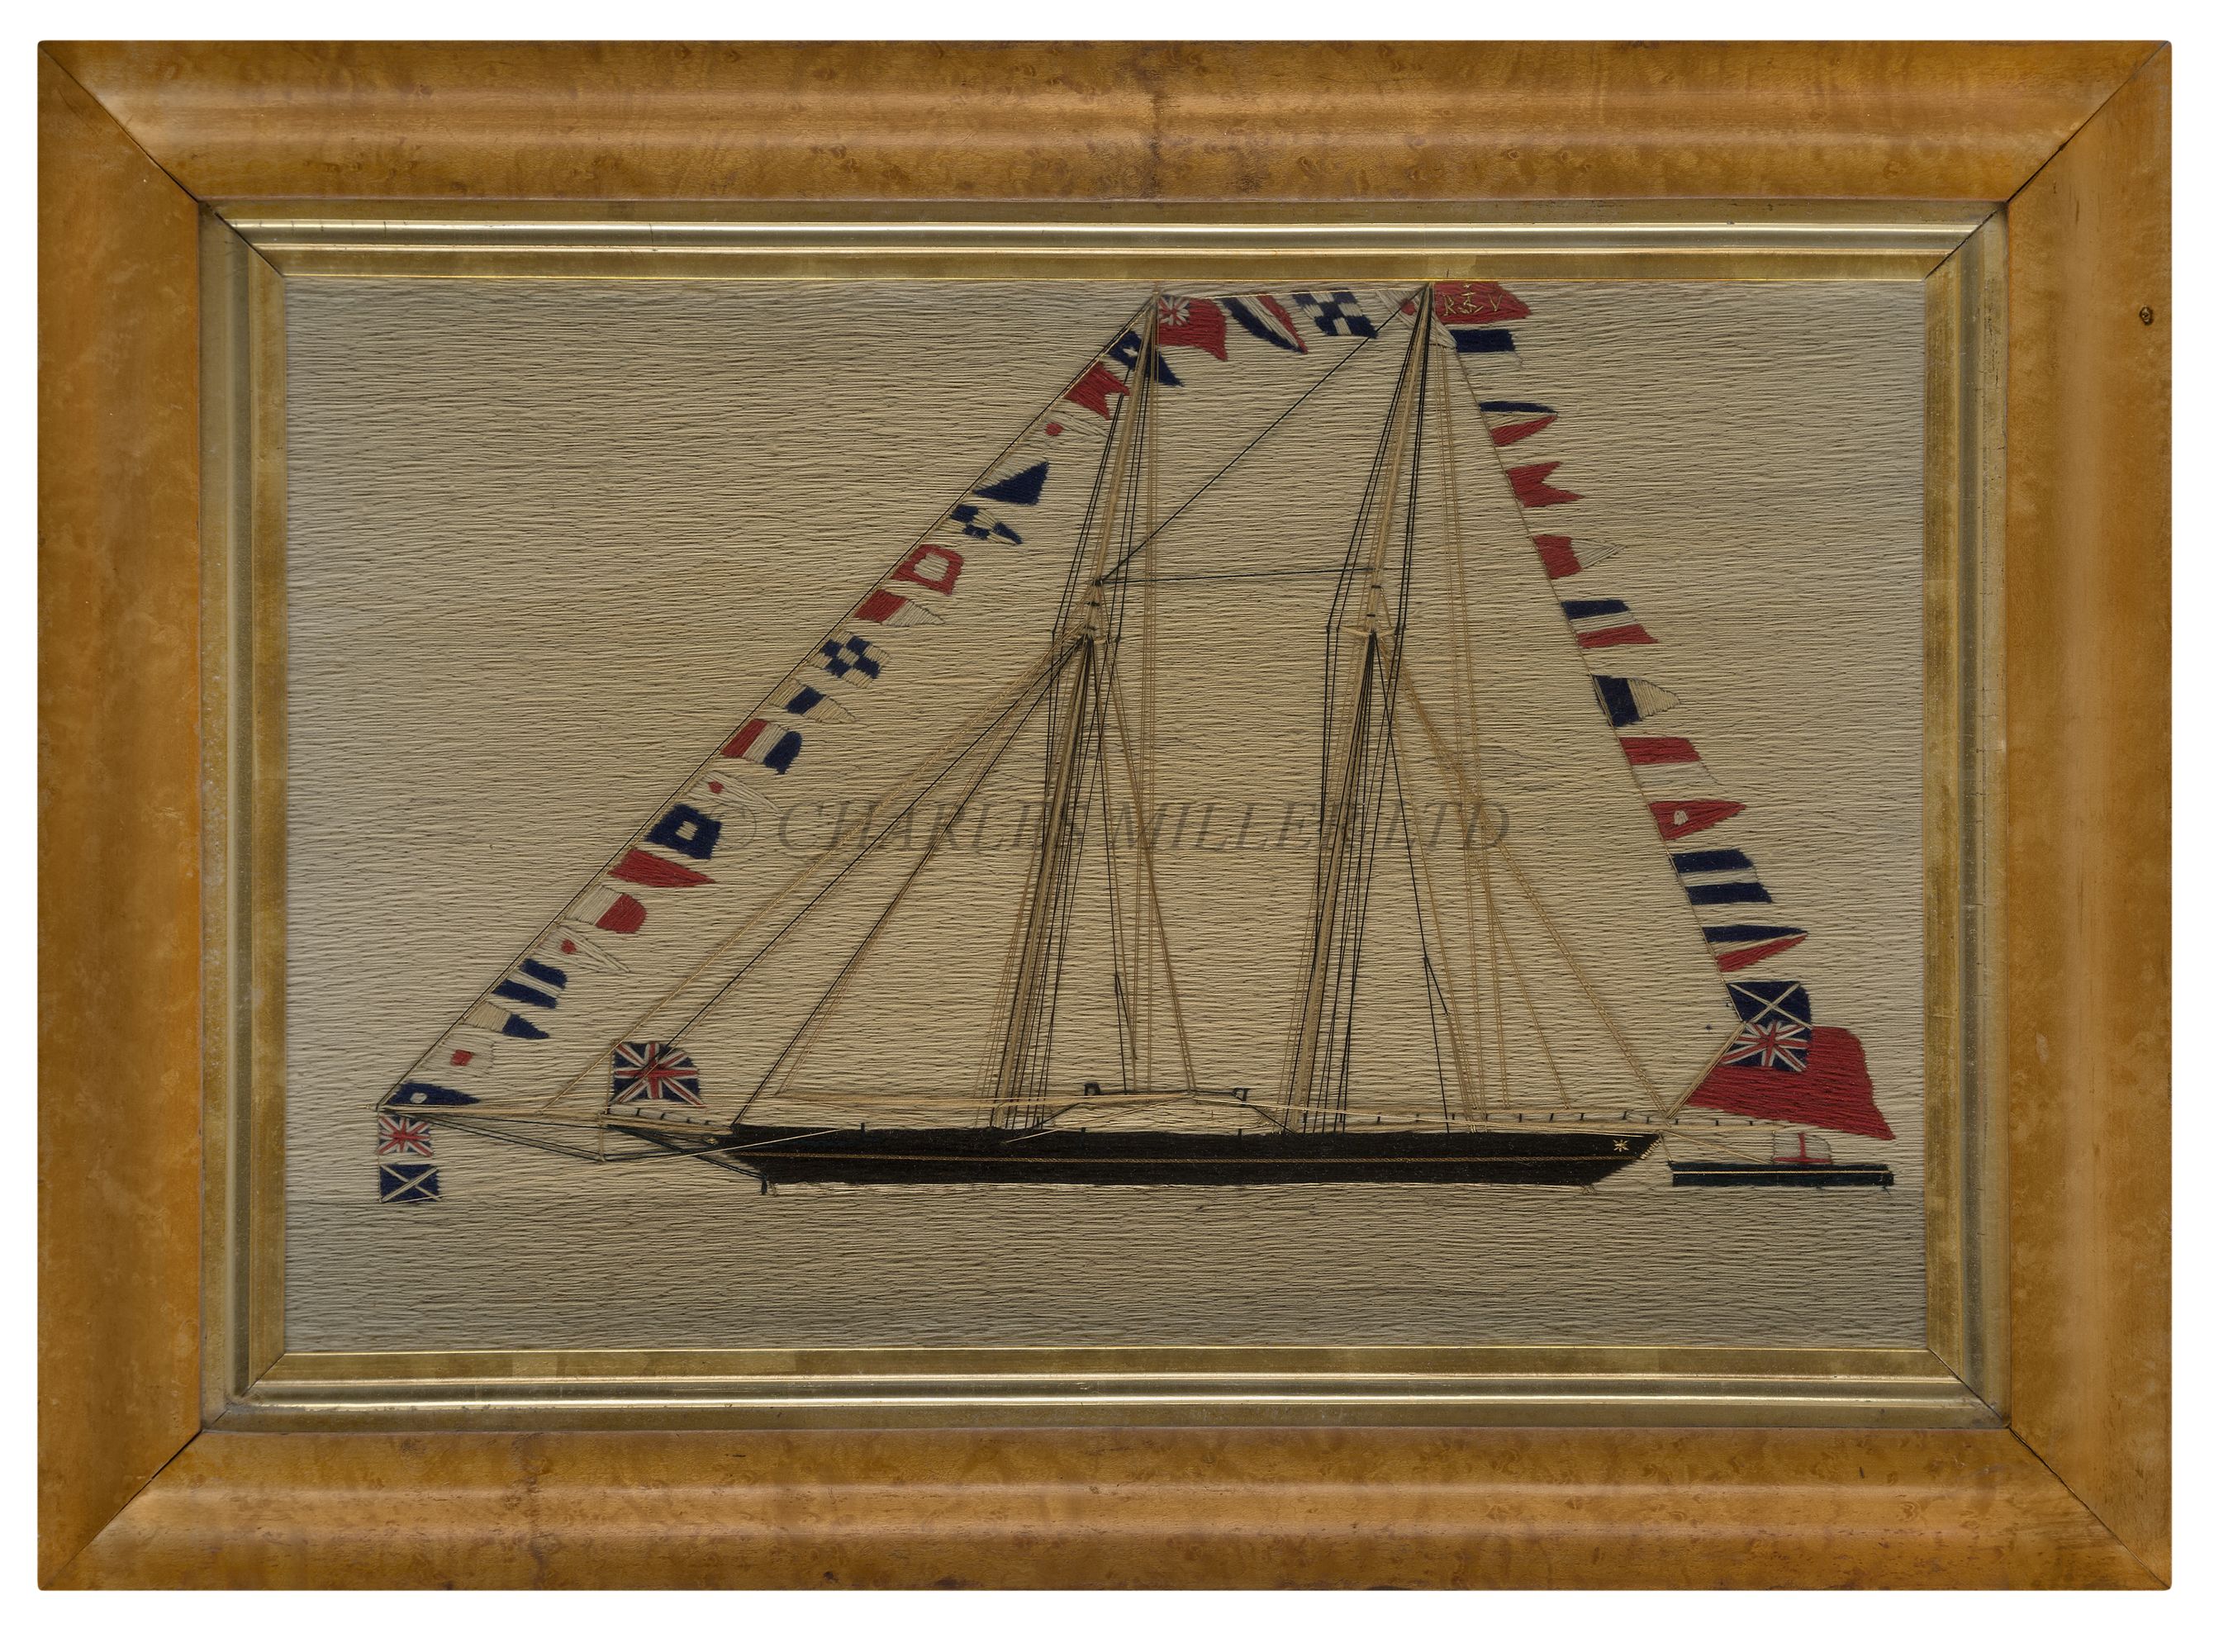 A RARE PAIR OF WOOLWORKS FOR A SCHOONER YACHT OF THE ROYAL VICTORIA YACHT CLUB, CIRCA 1880